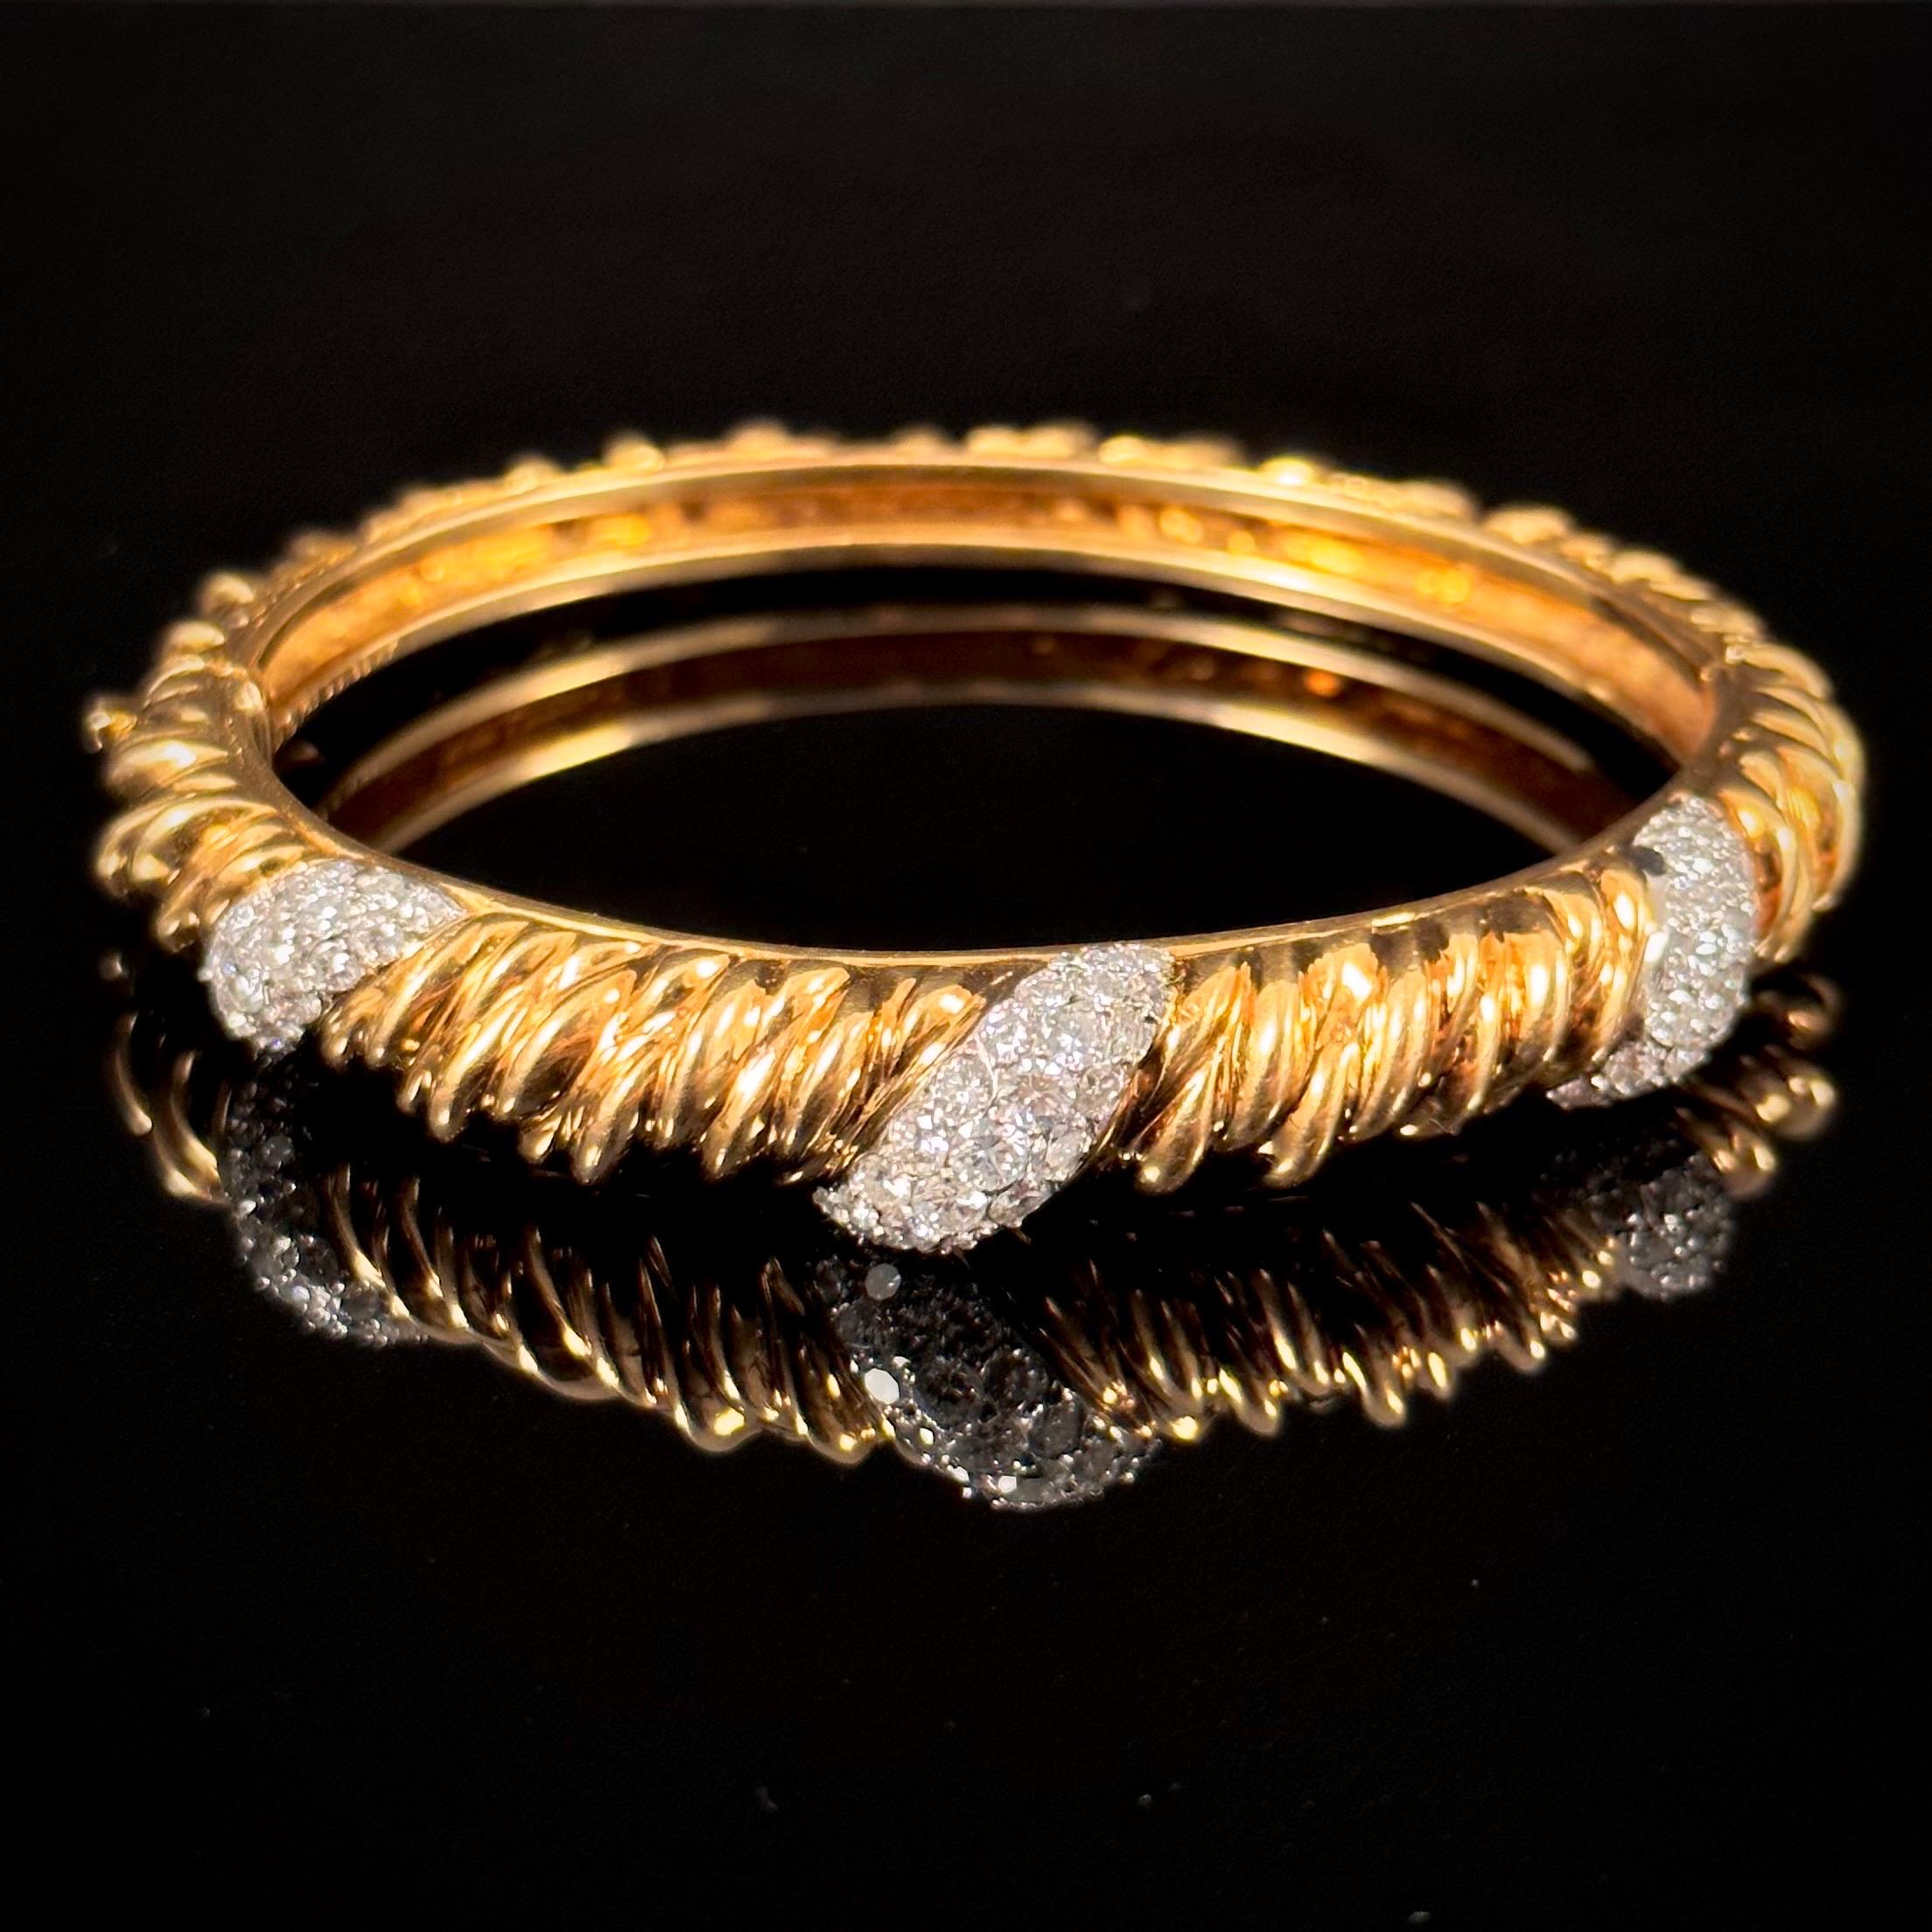 Van Cleef & Arpels VCA diamond ropework bangle bracelet in 18kt yellow gold and platinum, vintage from the 1970s, France. This two-part hinged bangle bracelet of an oval shape is designed with a twisted rope pattern in yellow gold, the top half